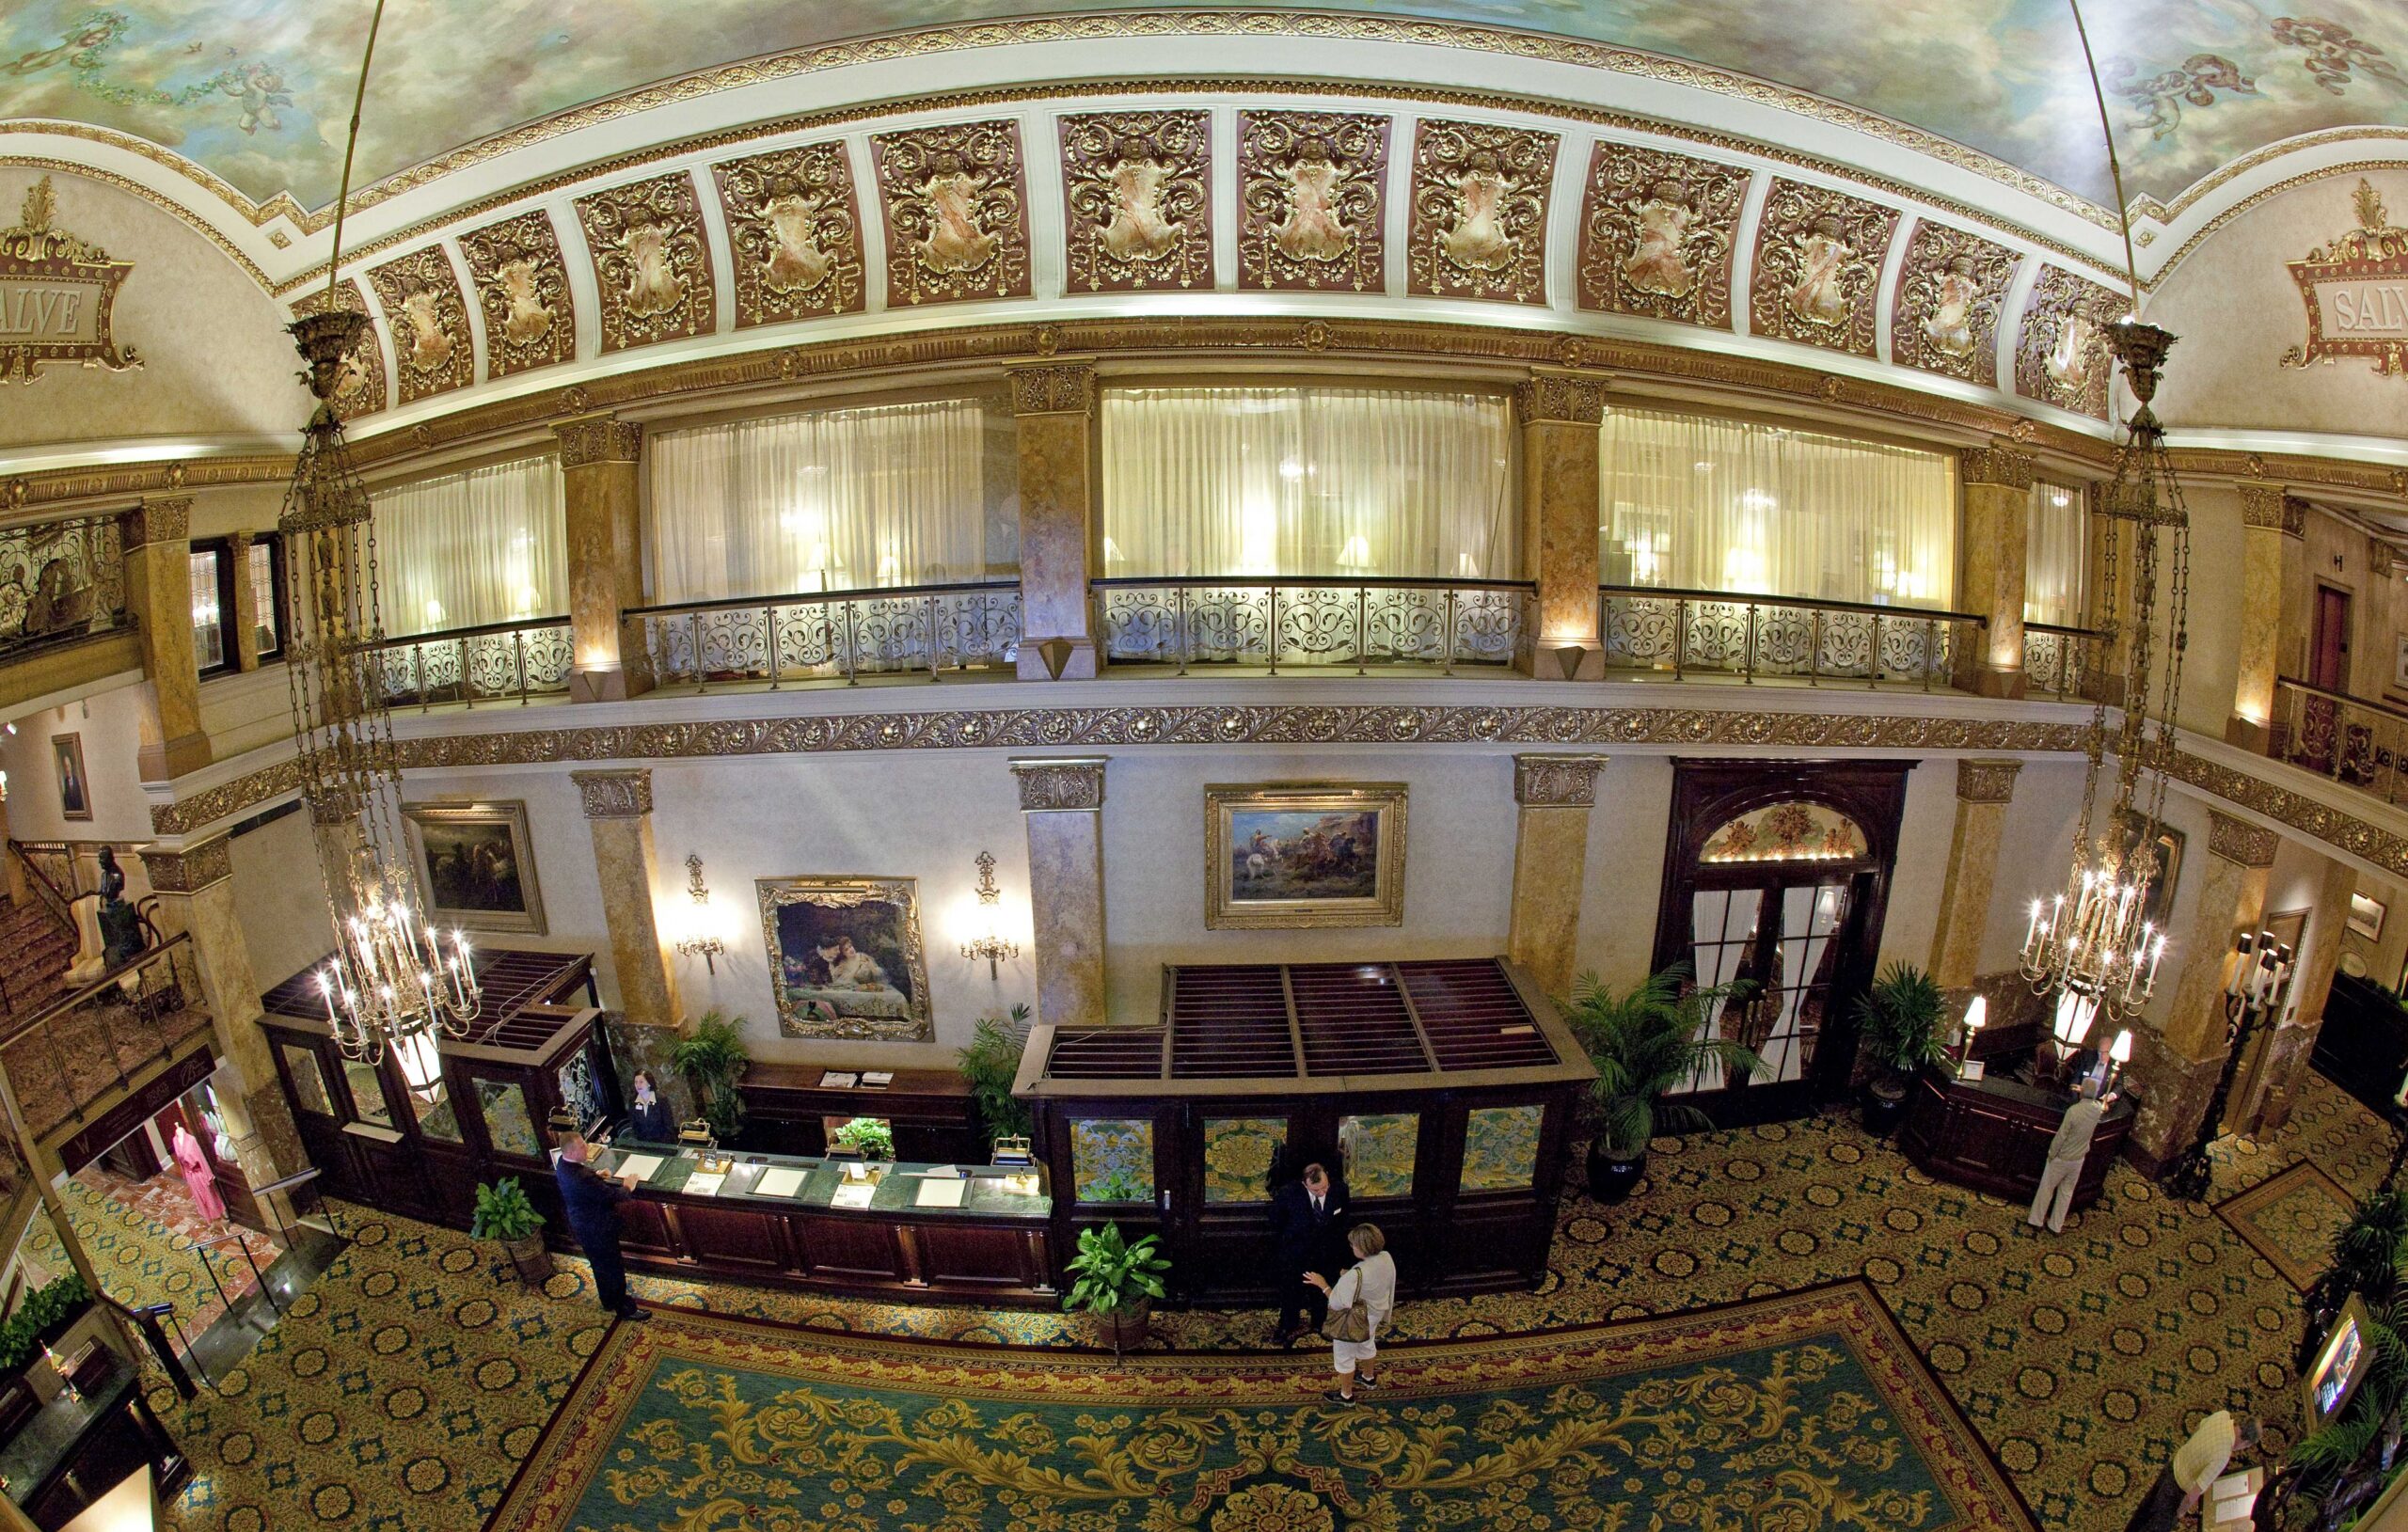 The lobby of the Pfister Hotel in Milwaukee